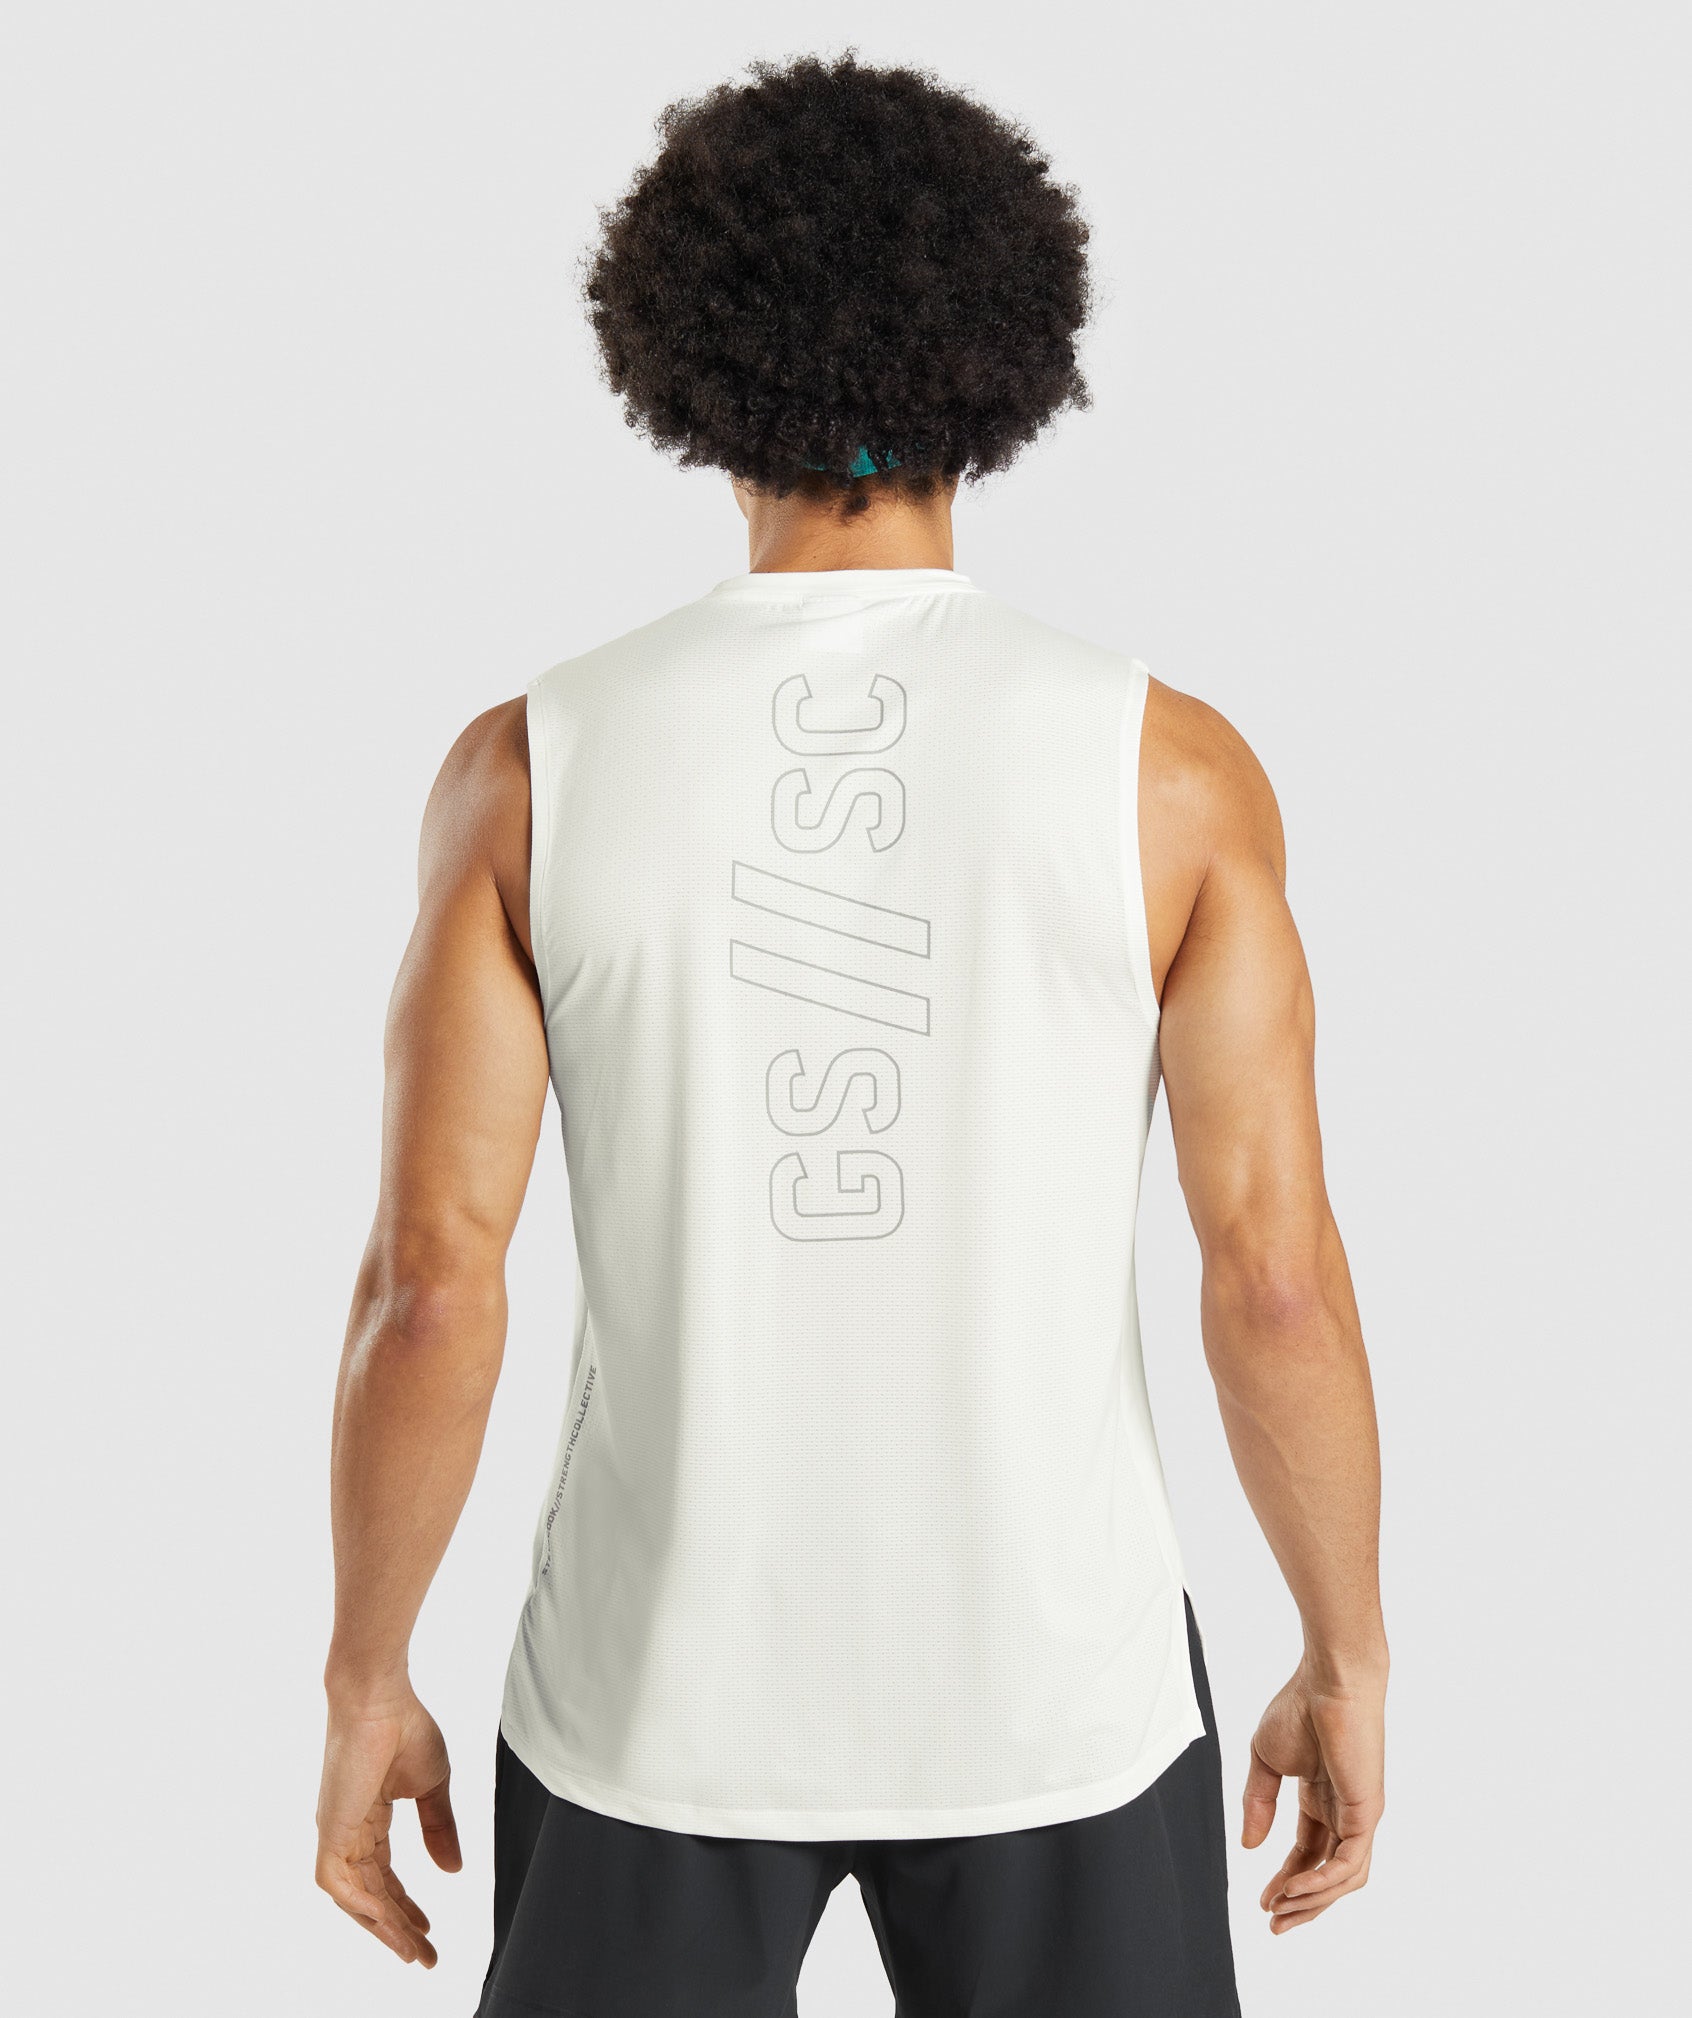 Gymshark//Steve Cook Tank in Off White - view 3